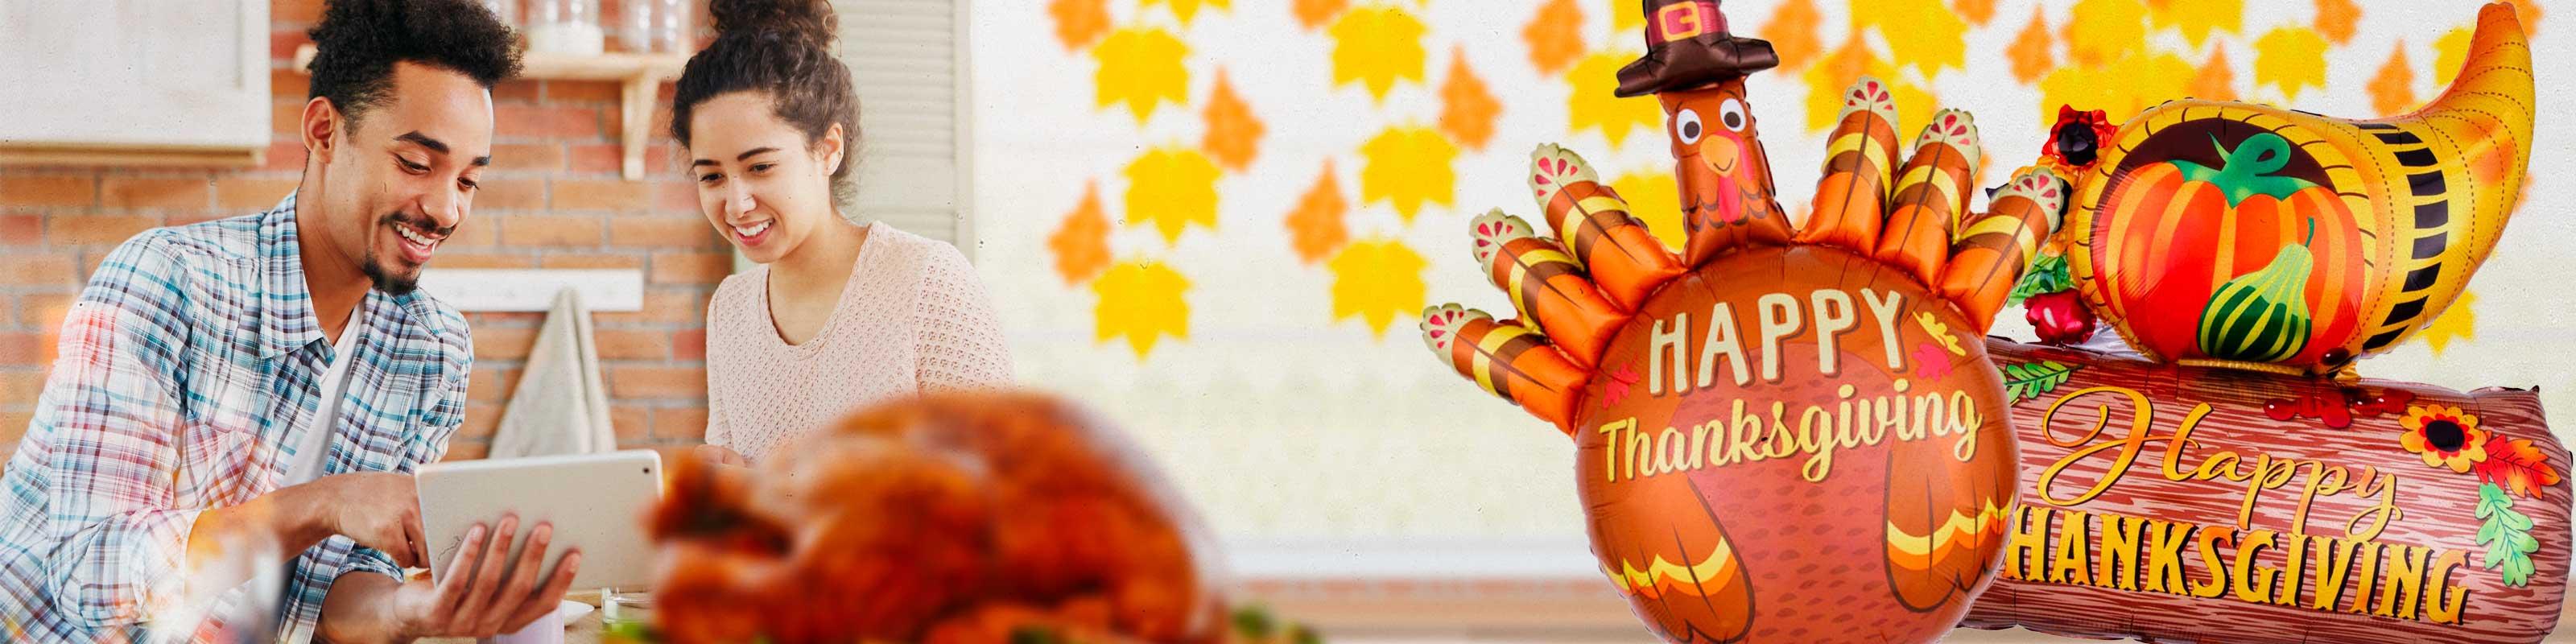 Thanksgiving Home Party Table Decoration Ideas in UAE - MyPartyCentre